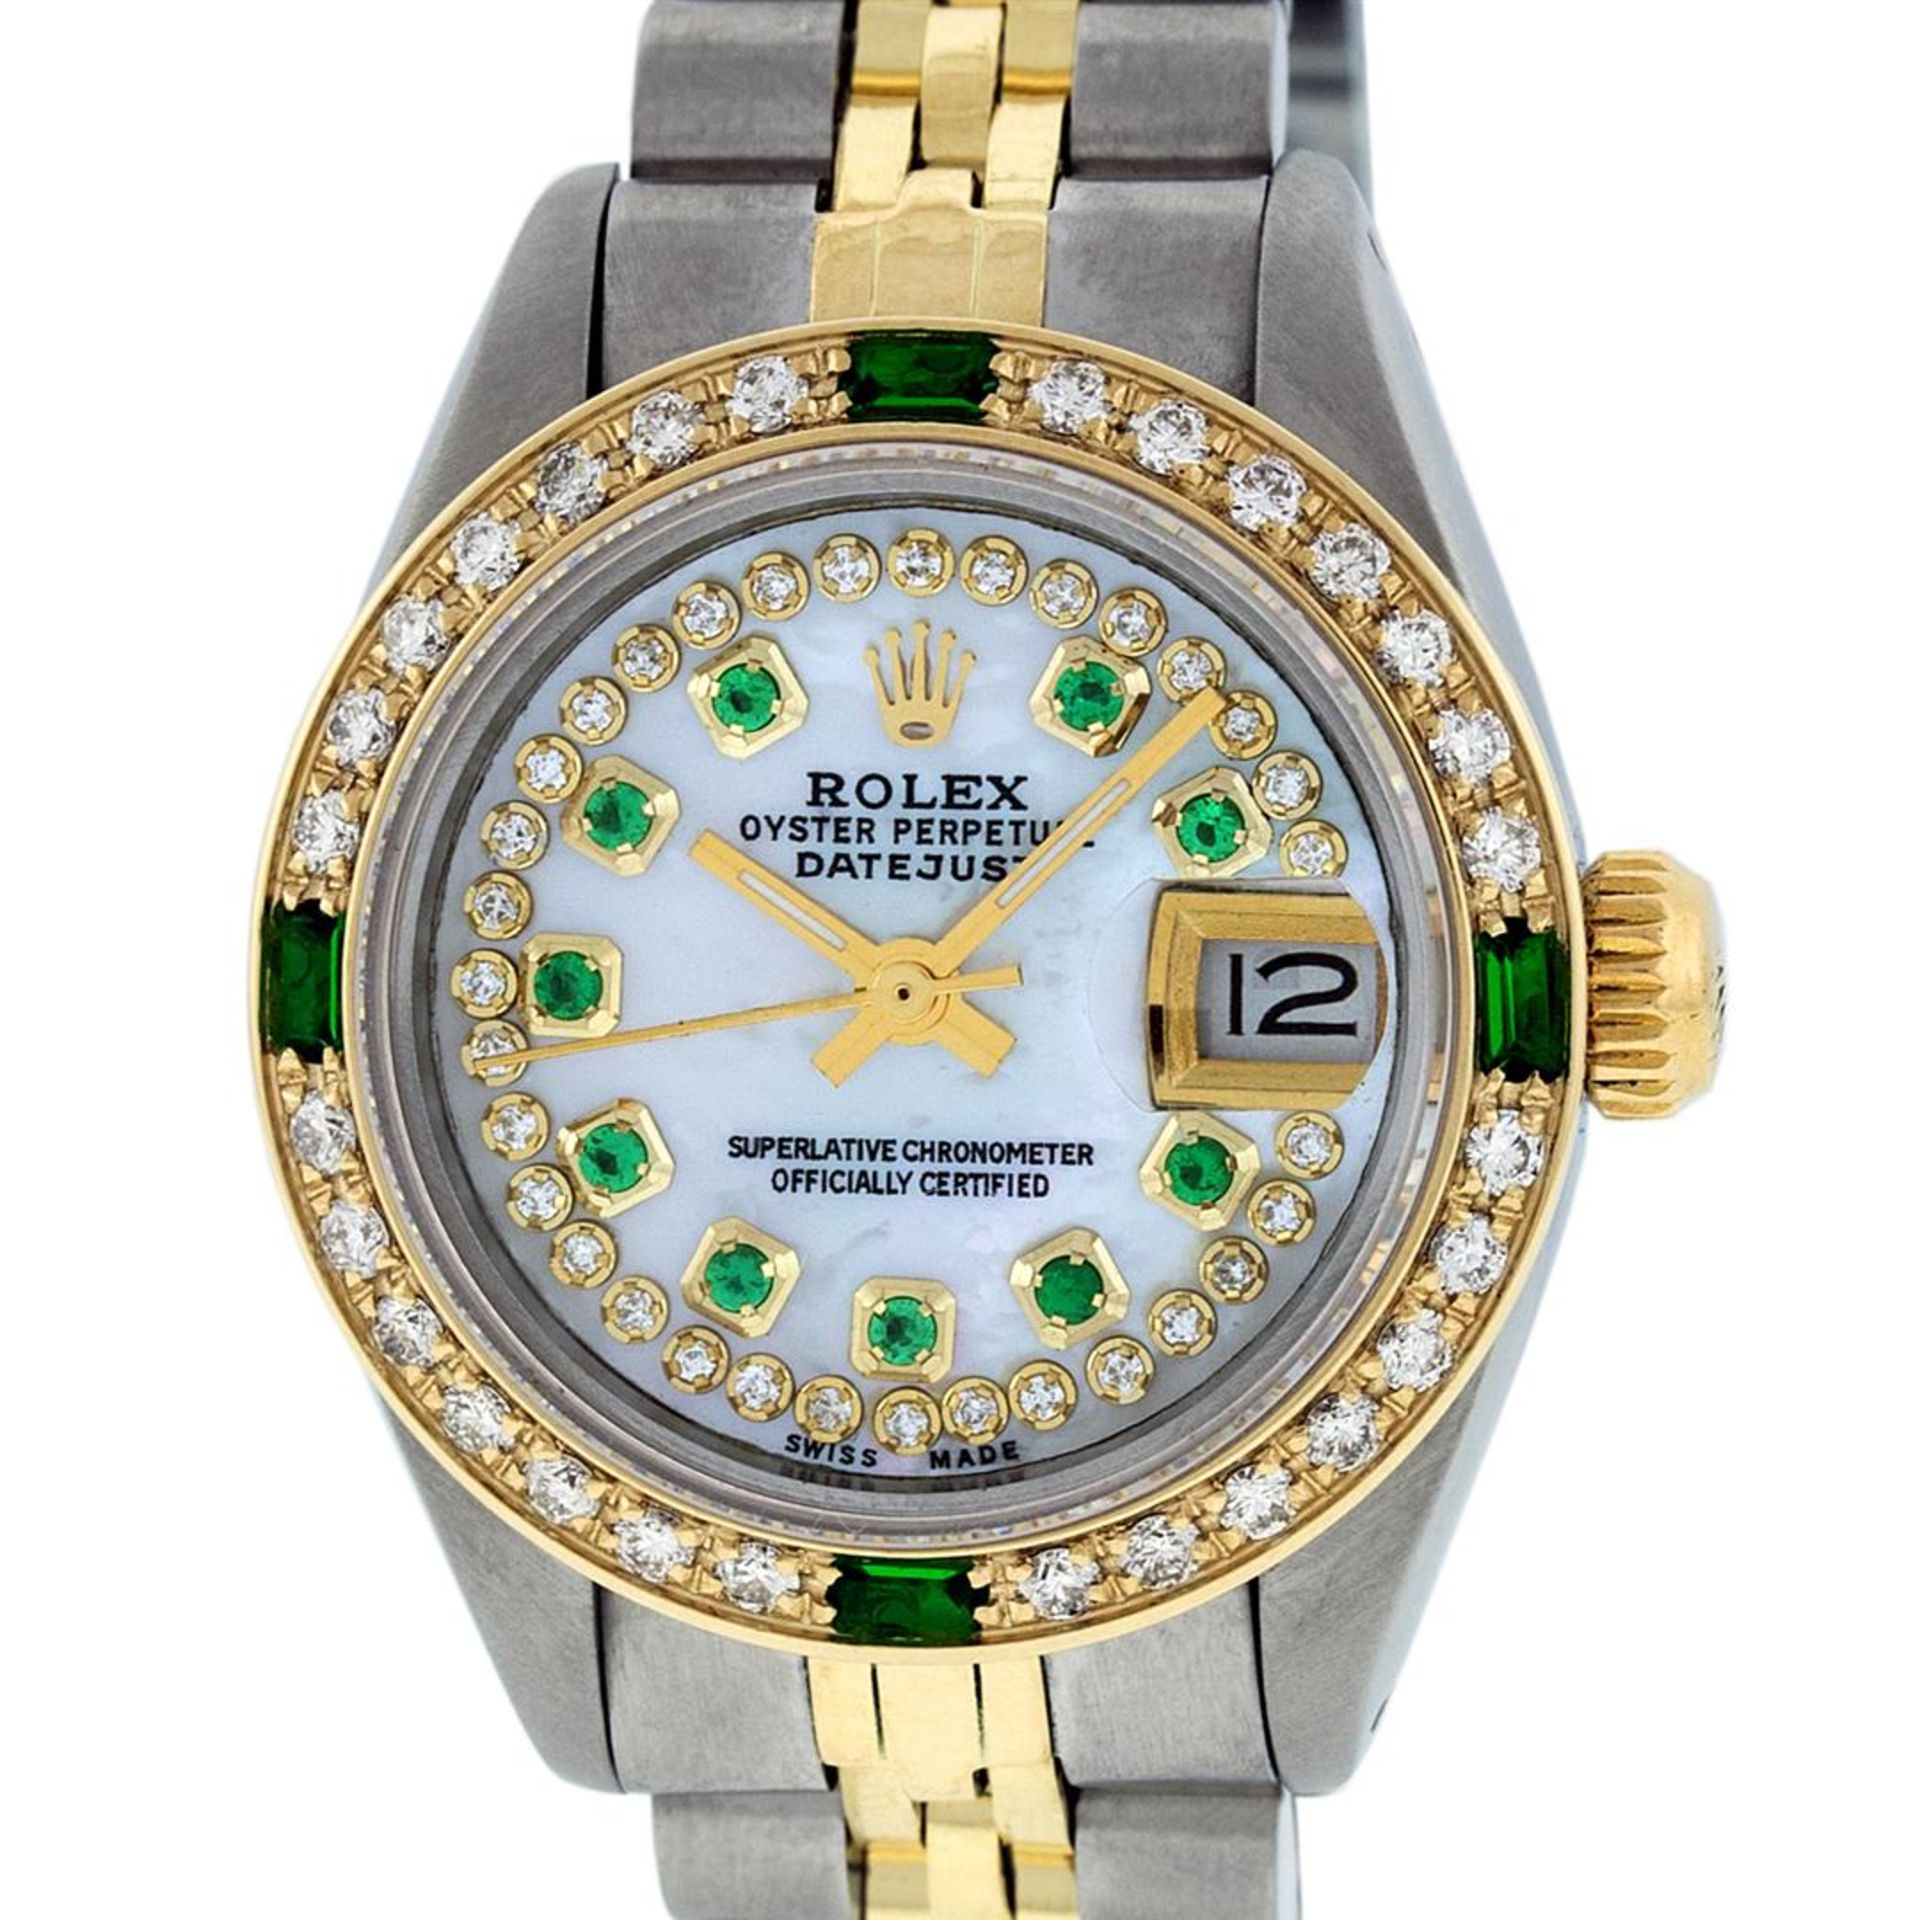 Rolex Ladies 2 Tone MOP Diamond & Emerald Datejust Oyster Perpetual Wristwatch - Image 2 of 9